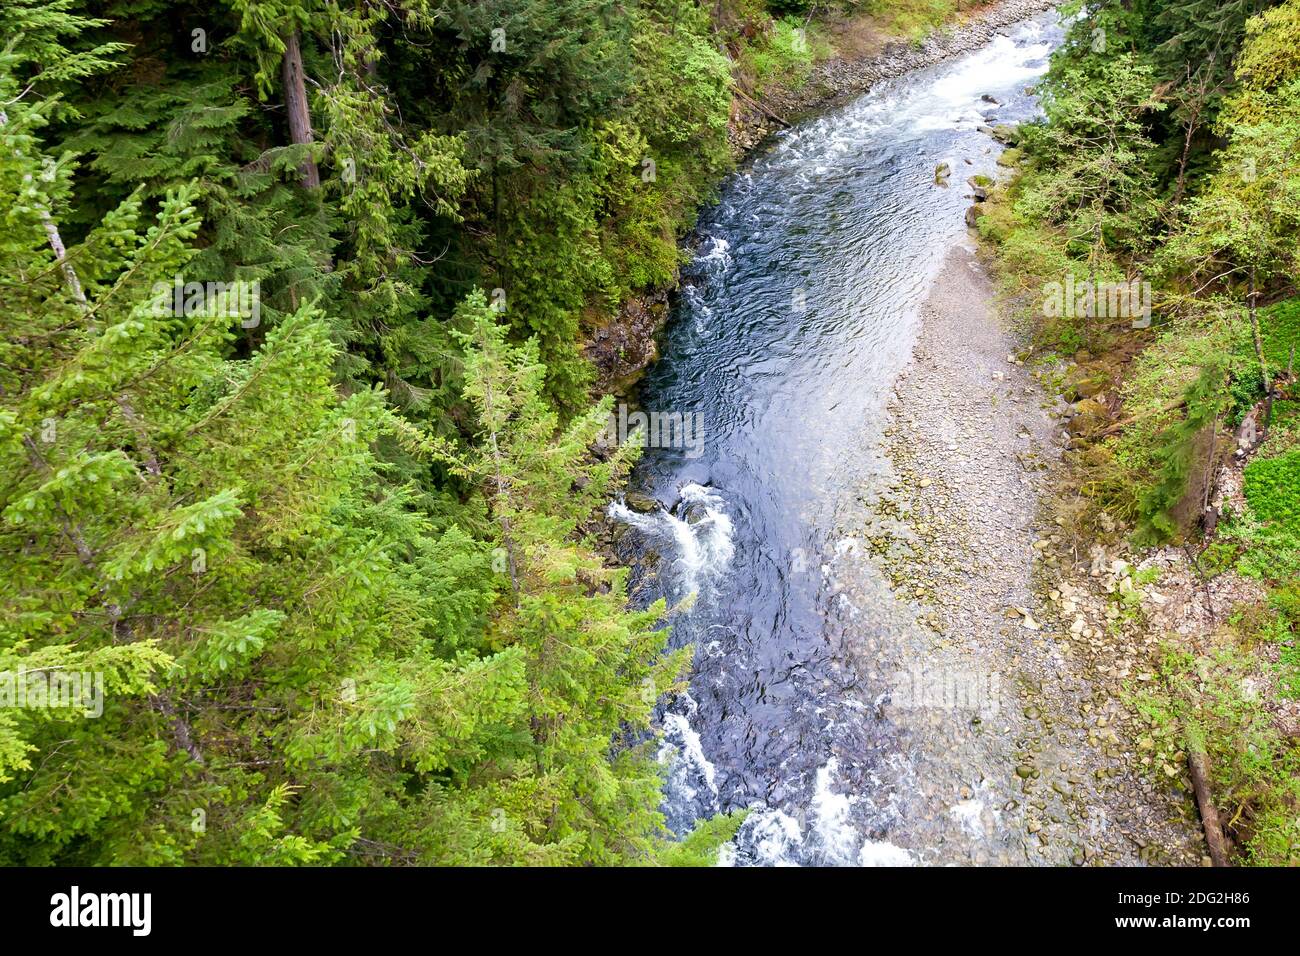 A view looking down onto the Capilano River and surrounding old-growth forest in North Vancouver, British Columbia, Canada Stock Photo